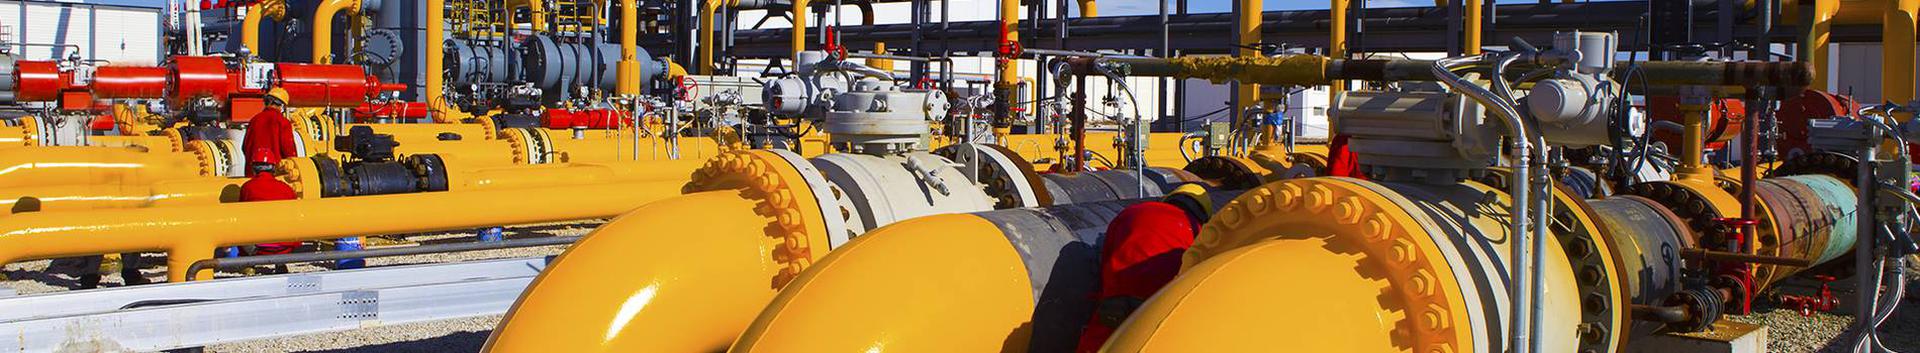 Energy and Mineral Resources, Gas supply, fuels, mineral resources and raw materials, Equipment and machinery, Provision of gas distribution service, Gas sales